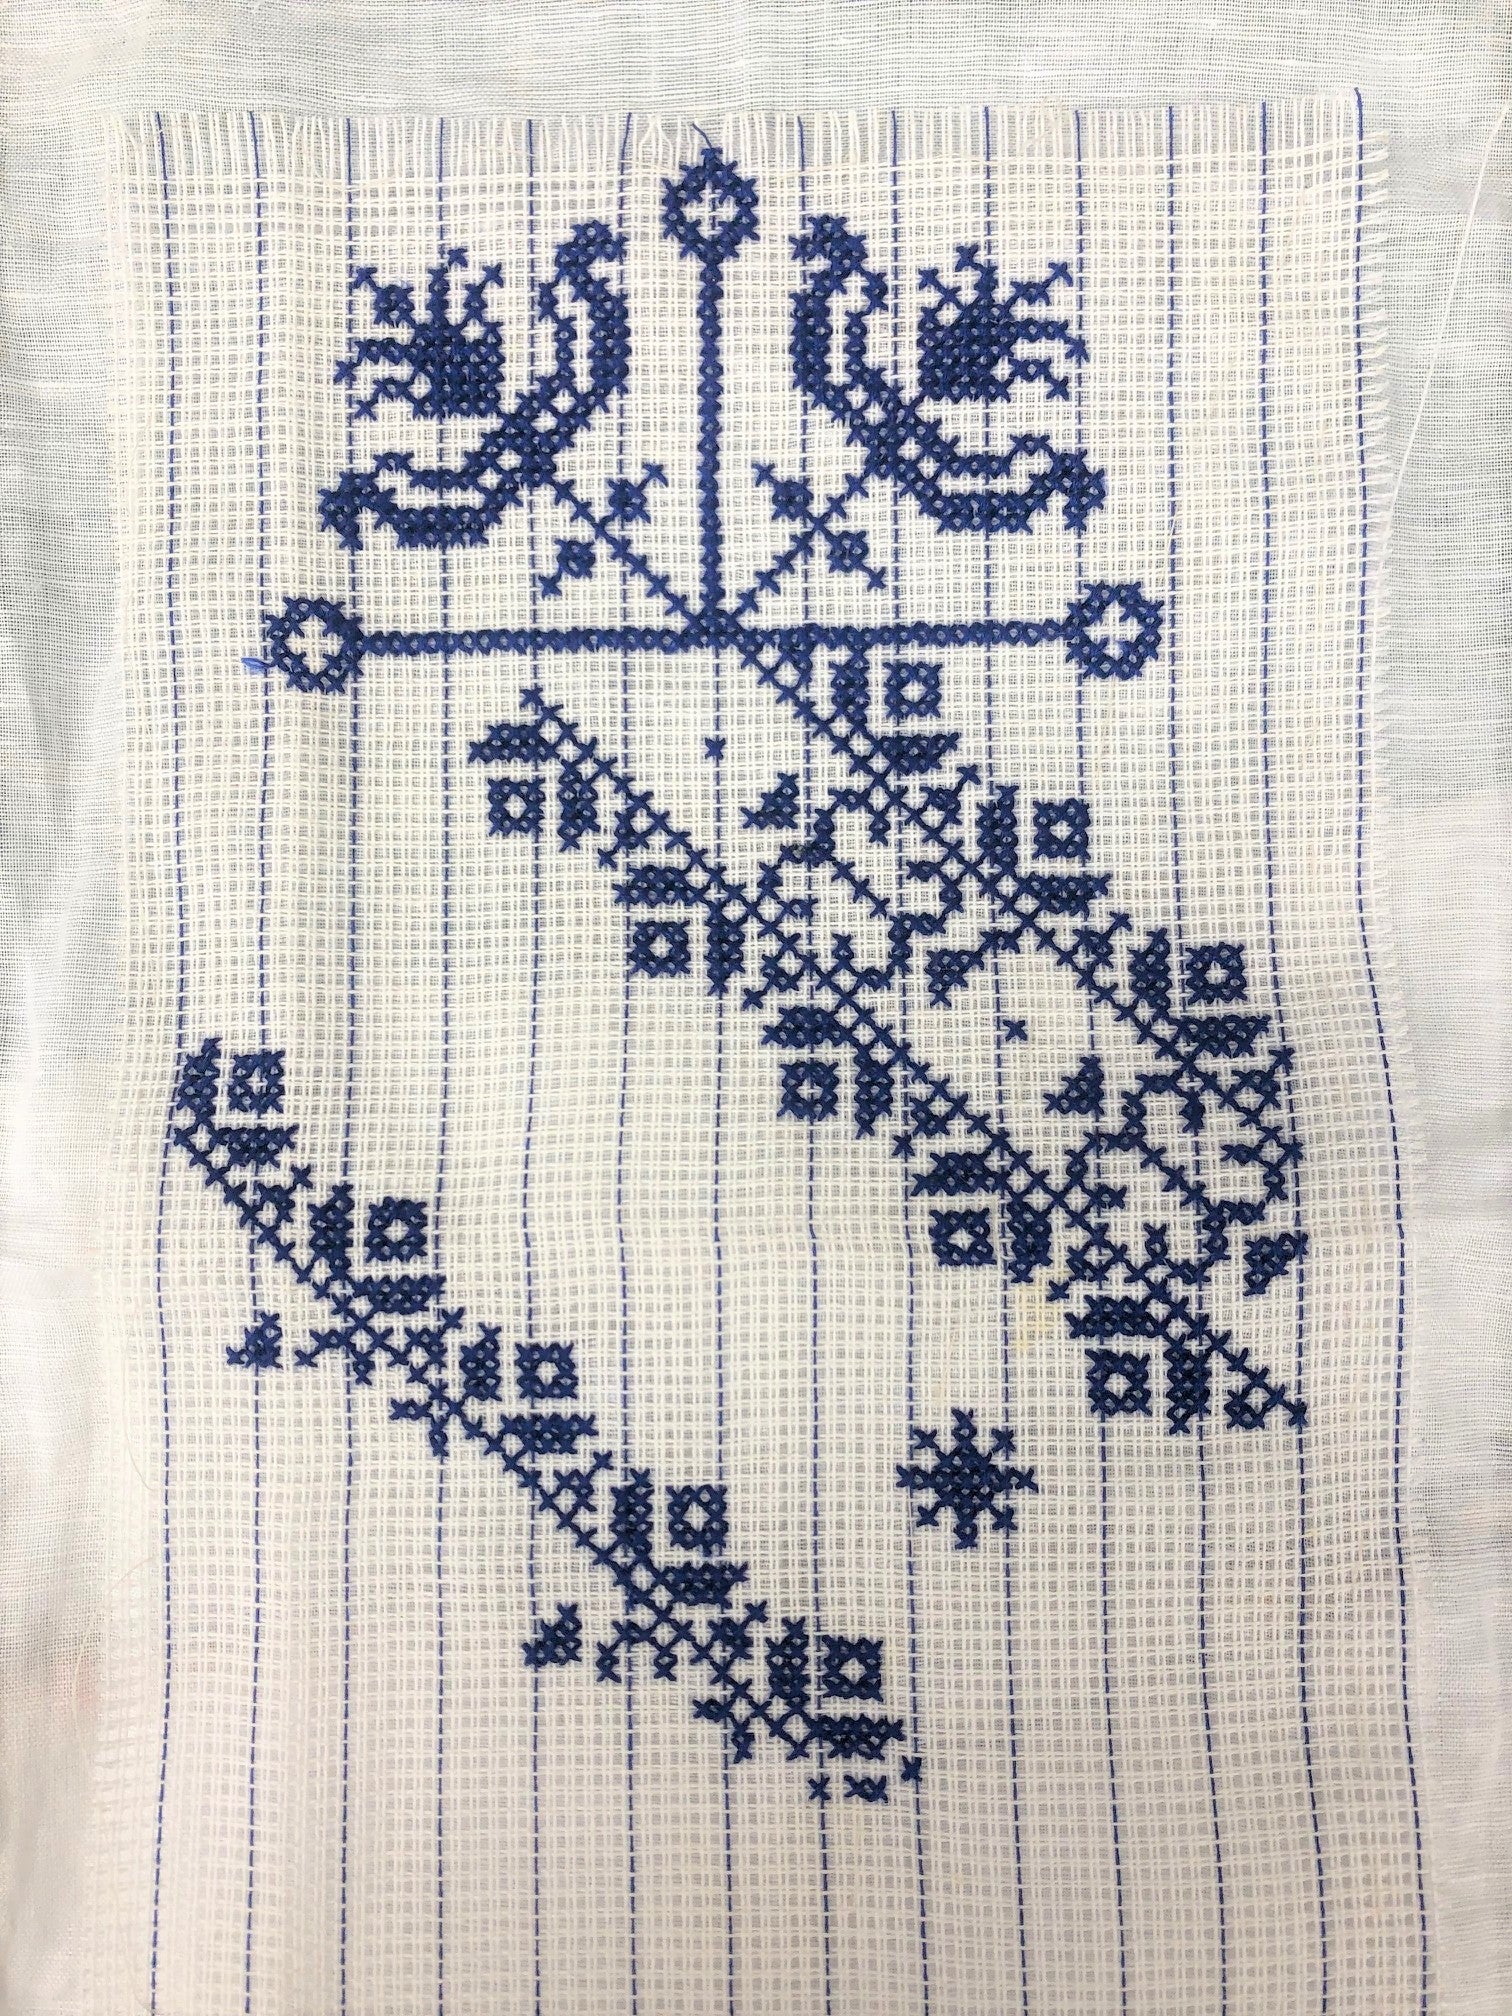 Romanian Blouse Embroidery Stitches